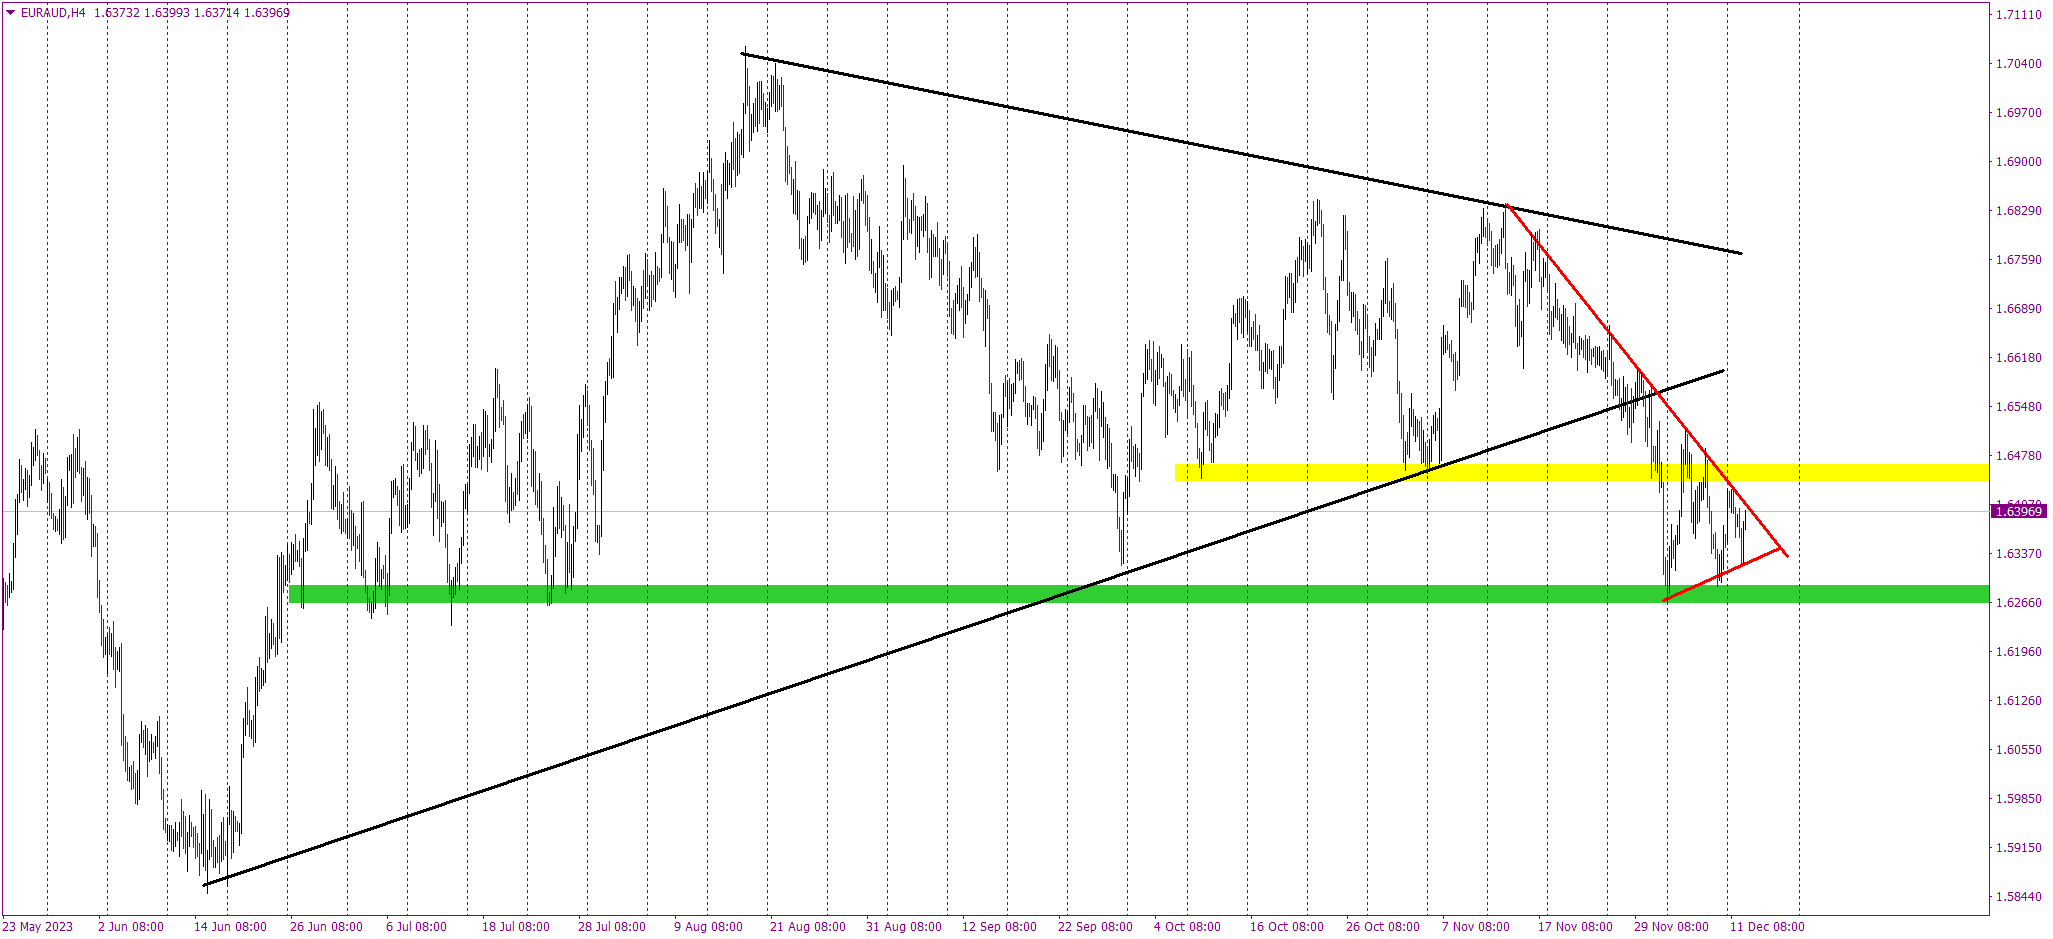 EURAUD. A Tale of Triangles and Decisive Breakouts